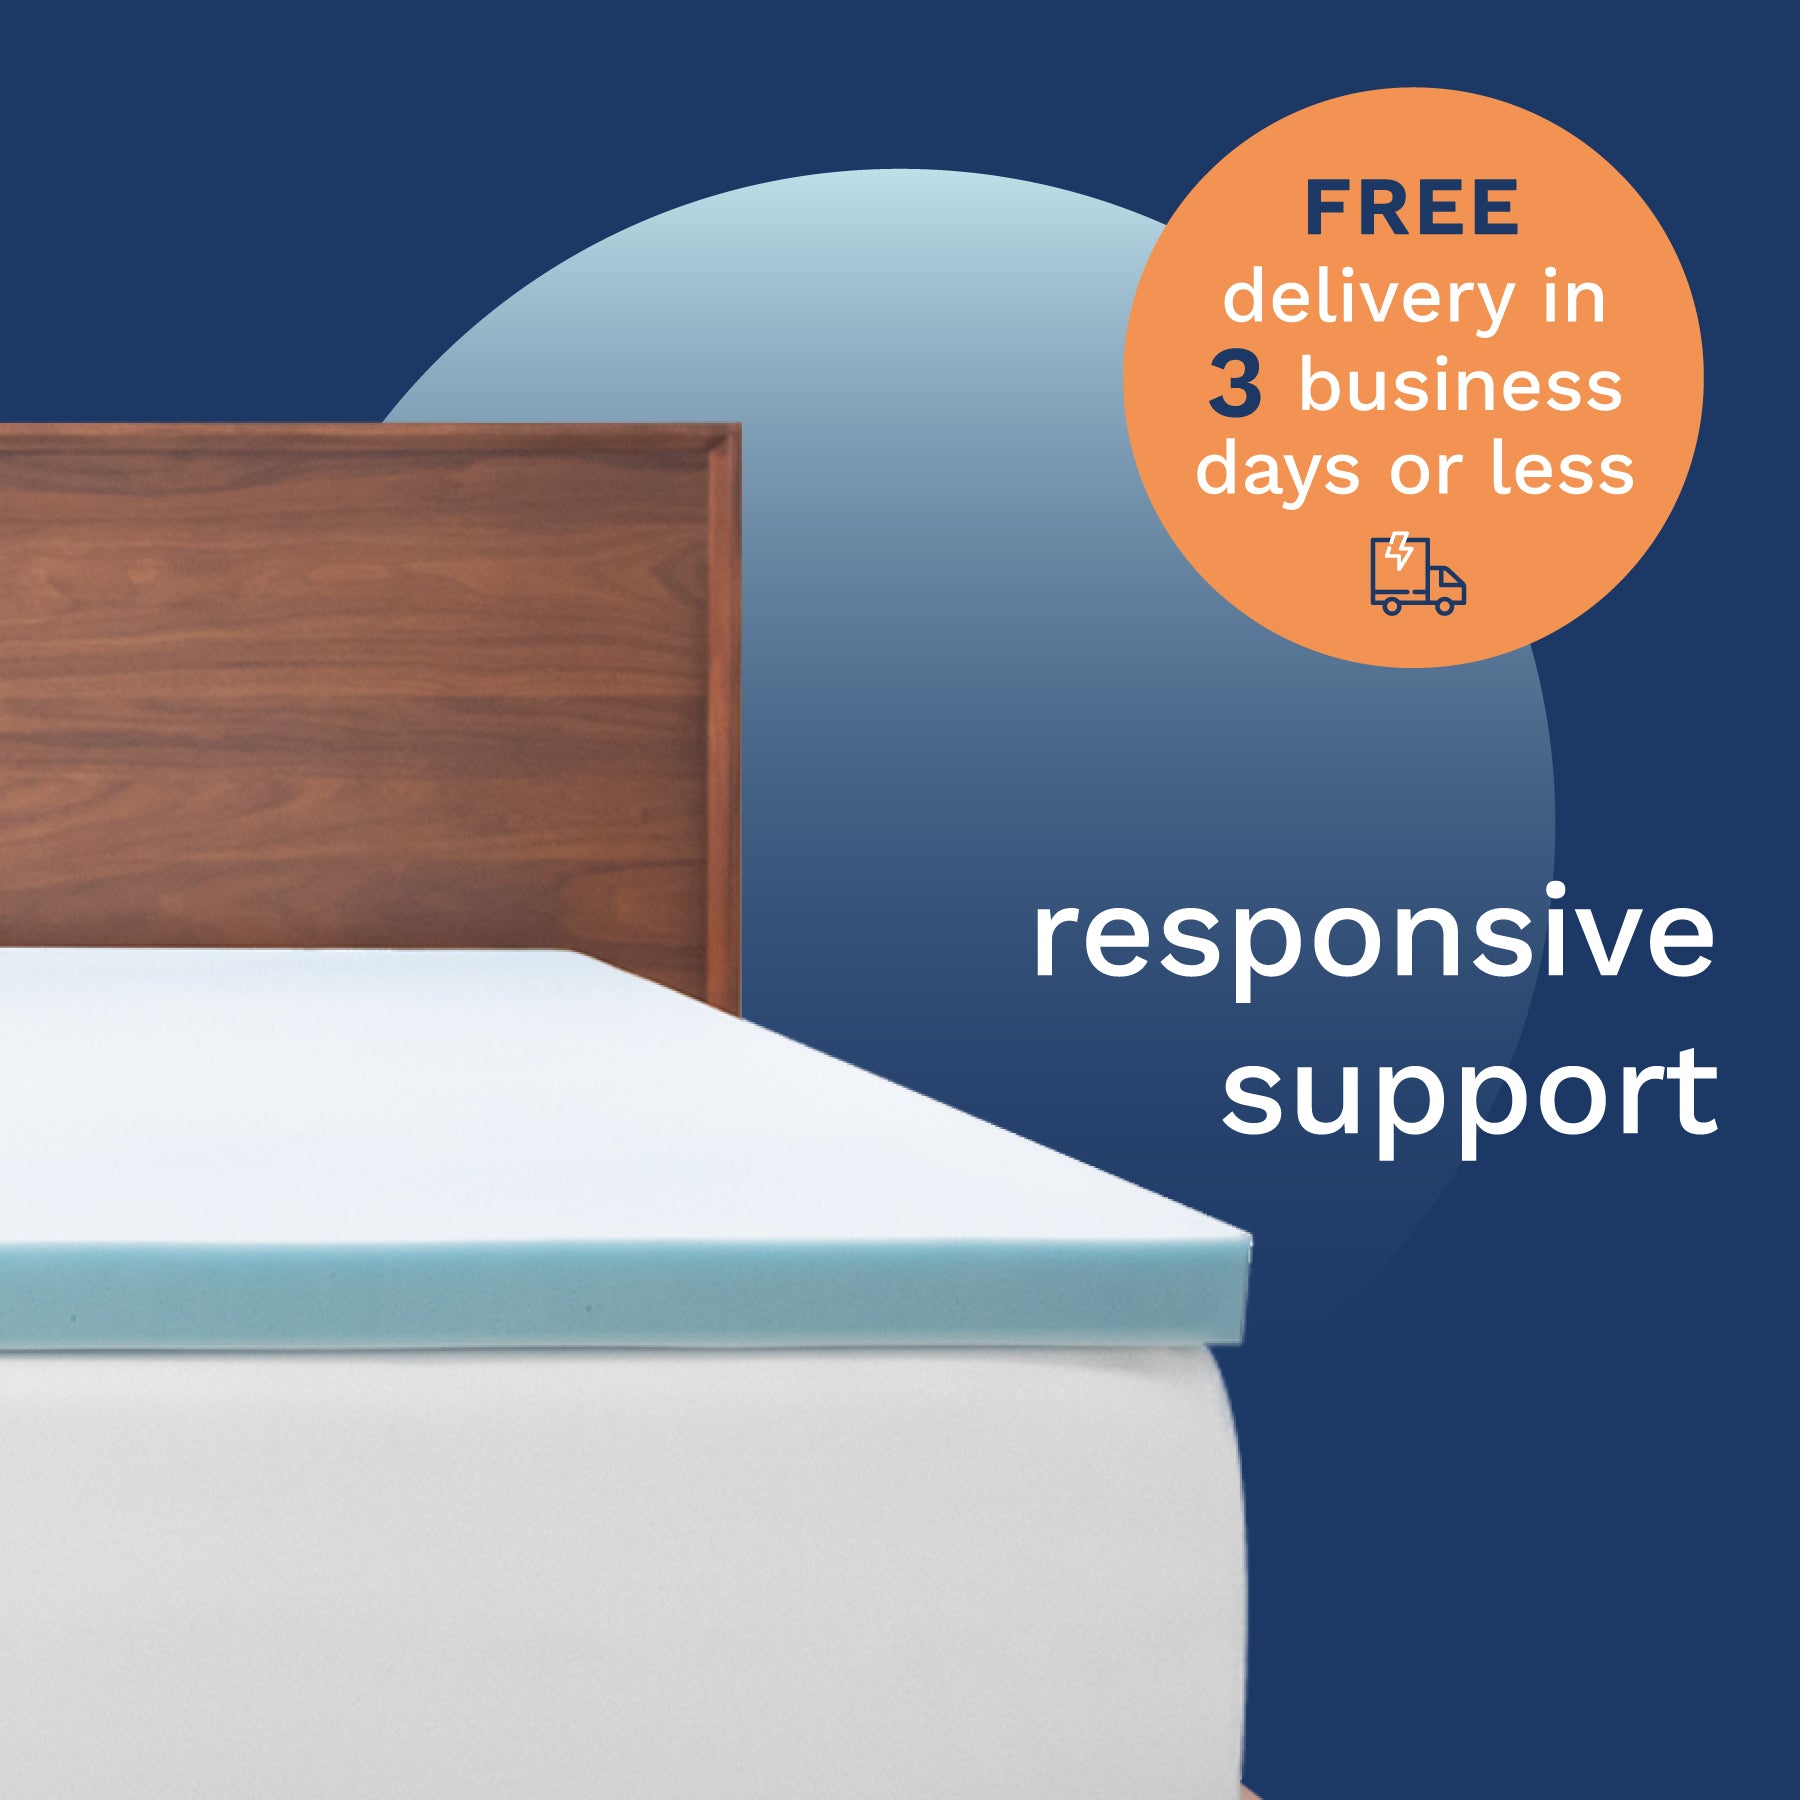 How to Keep Your Mattress Topper in Place – ViscoSoft